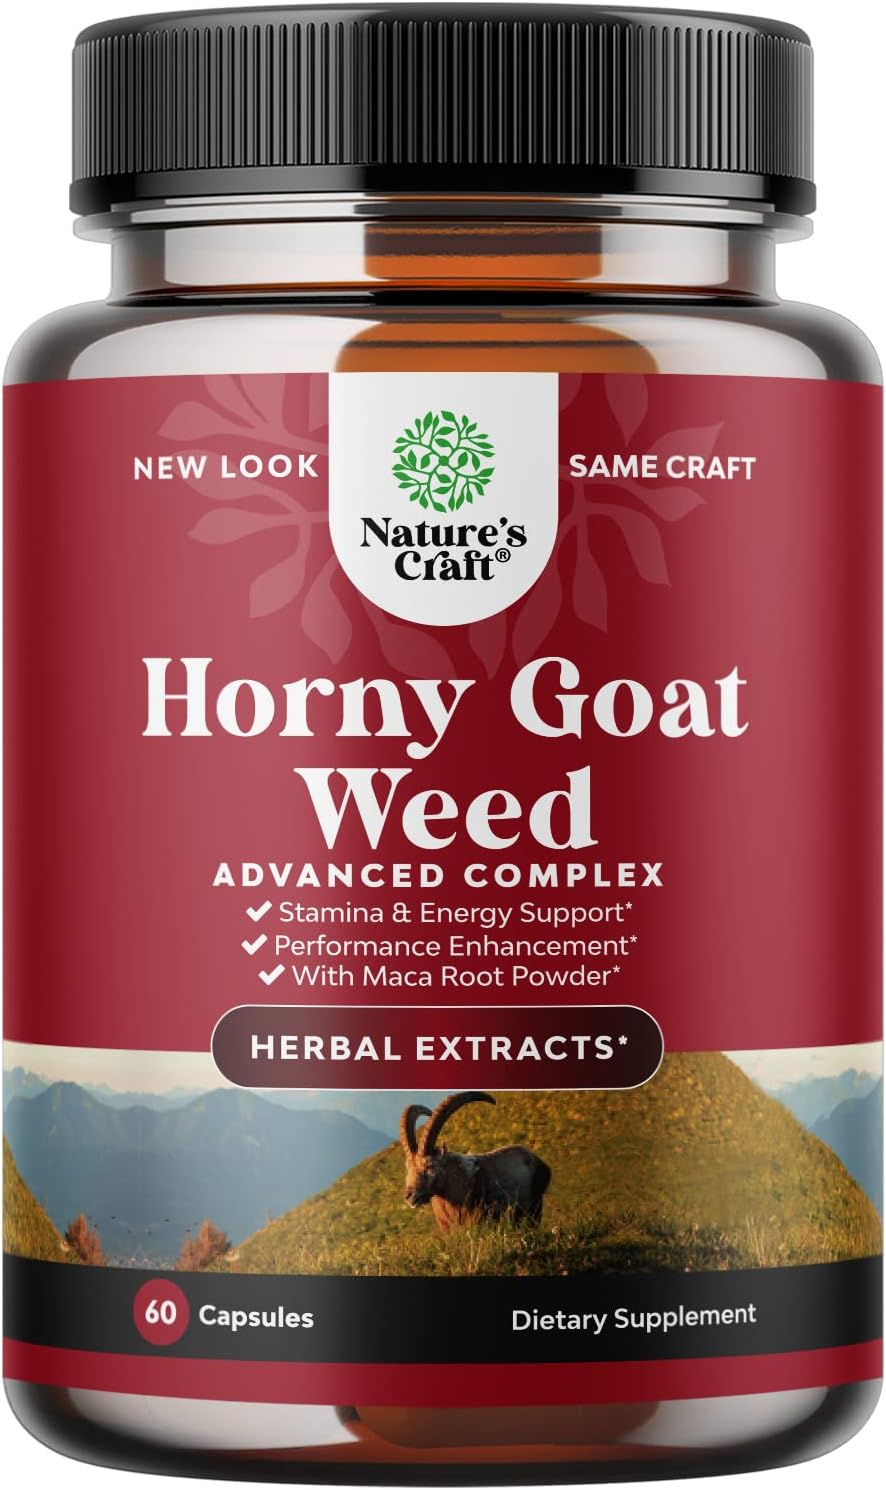 Horny Goat Weed for Male Enhancement - Halal Extra Strength Horny Goat Weed for Men 1590mg Complex w